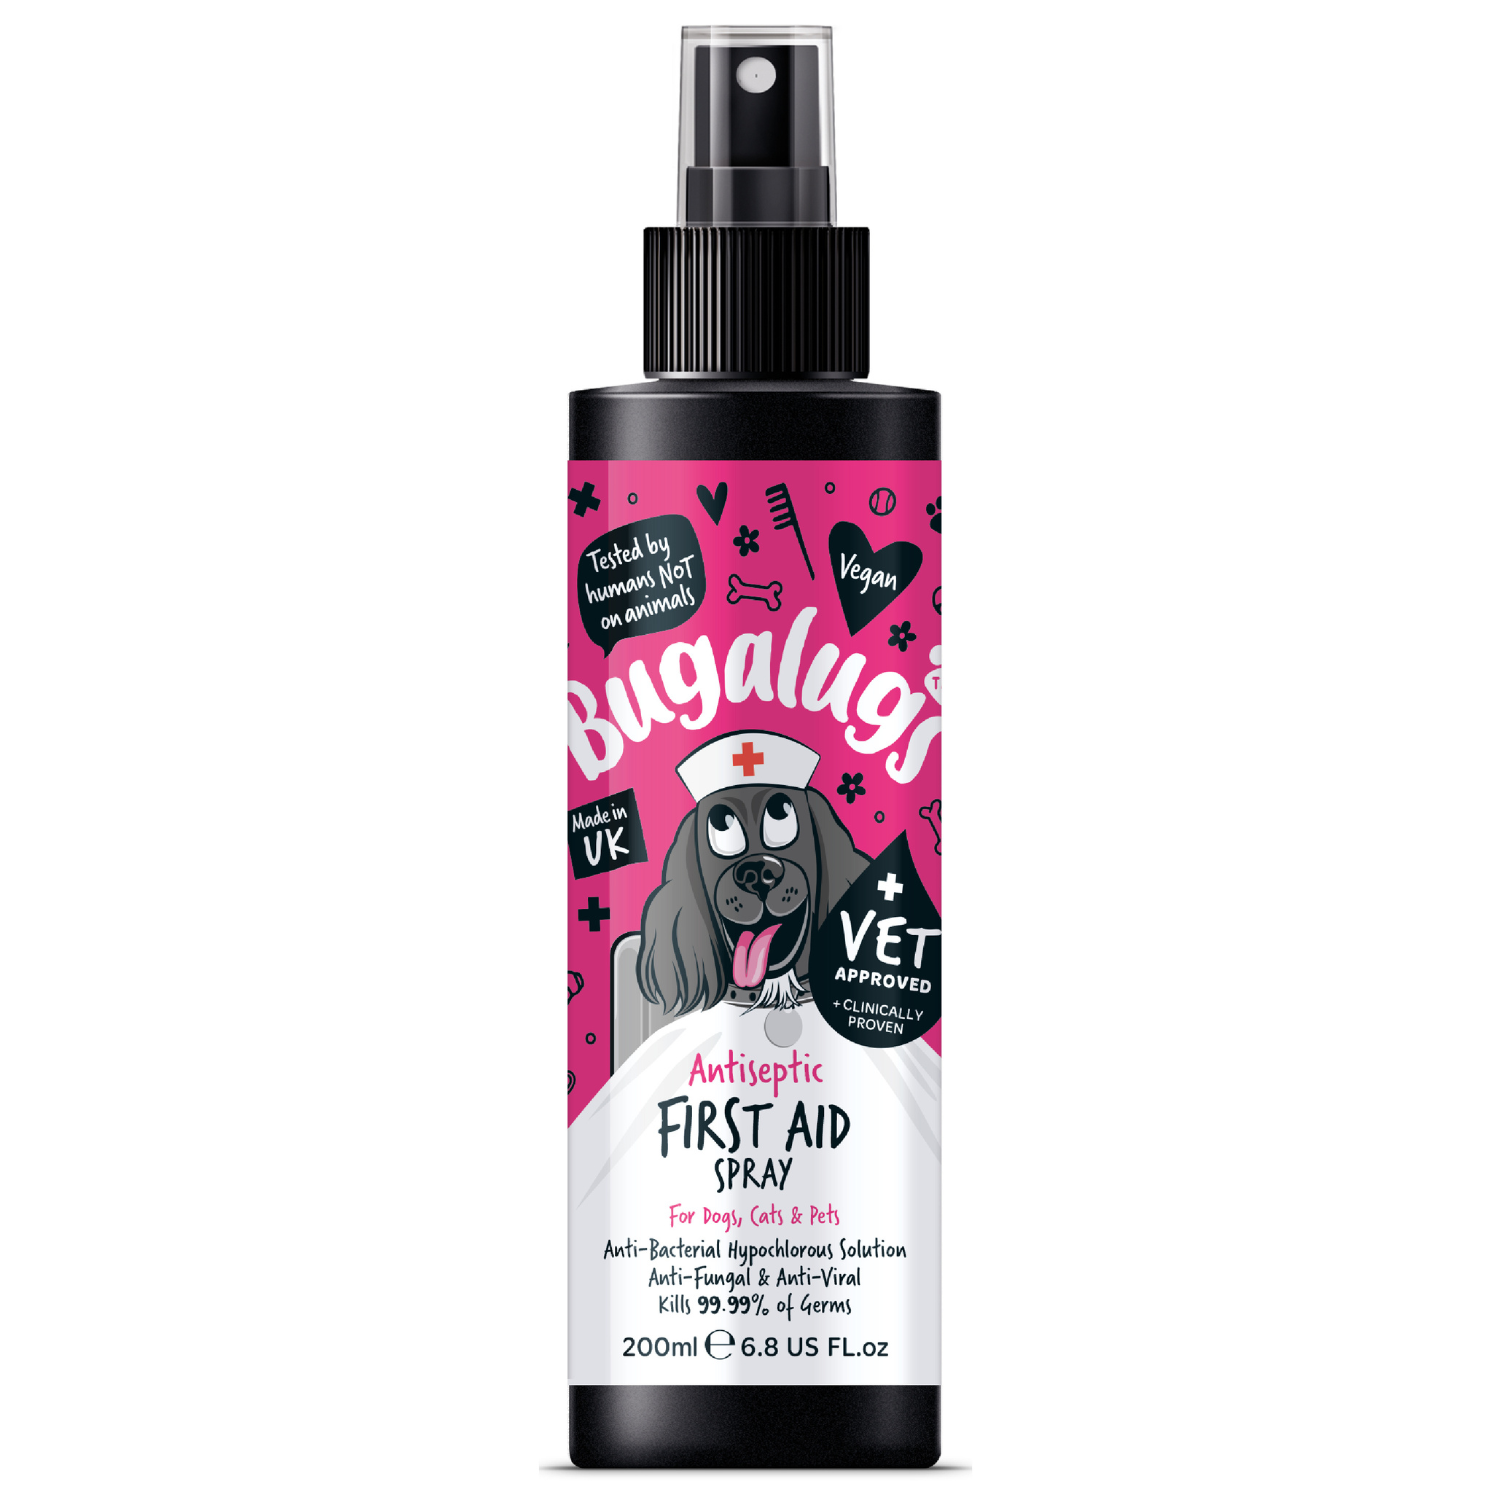 Bugalugs Antiseptic First Aid Spray for Dogs, Cats and Pets